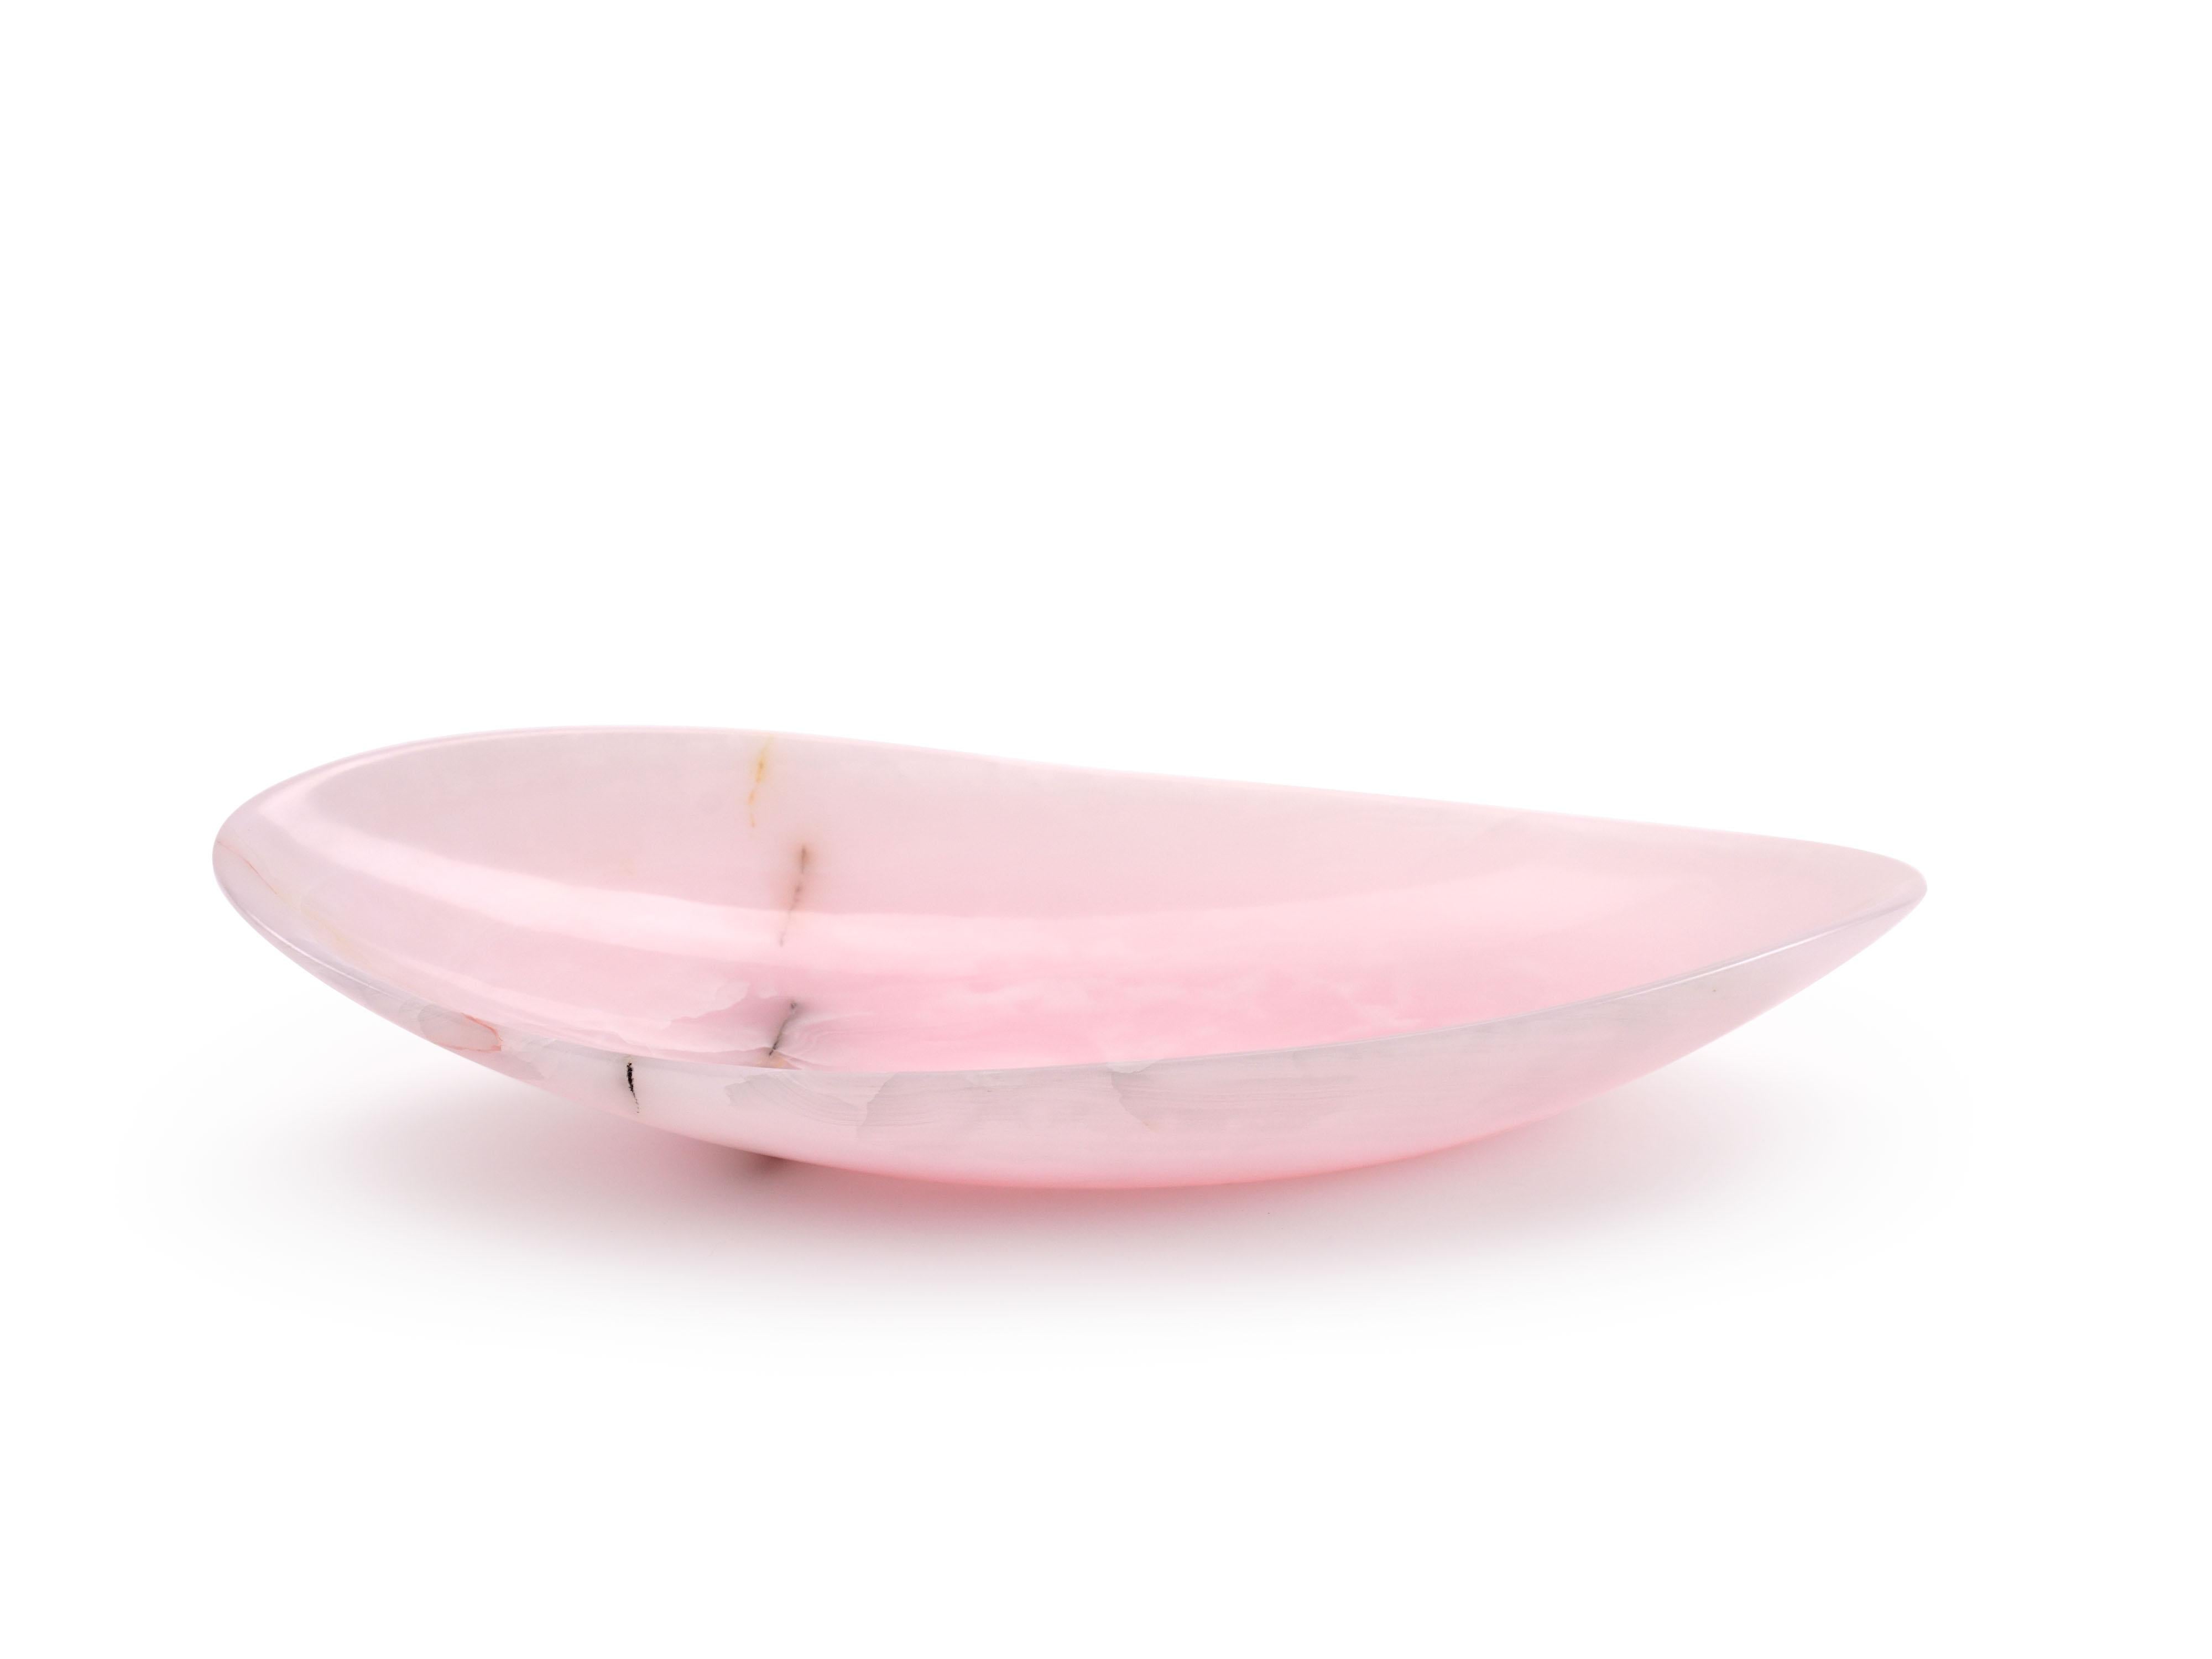 Contemporary Pink Onyx Decorative Bowl Centerpiece Vase Vessel Sculpture Hand Carved, Italy For Sale